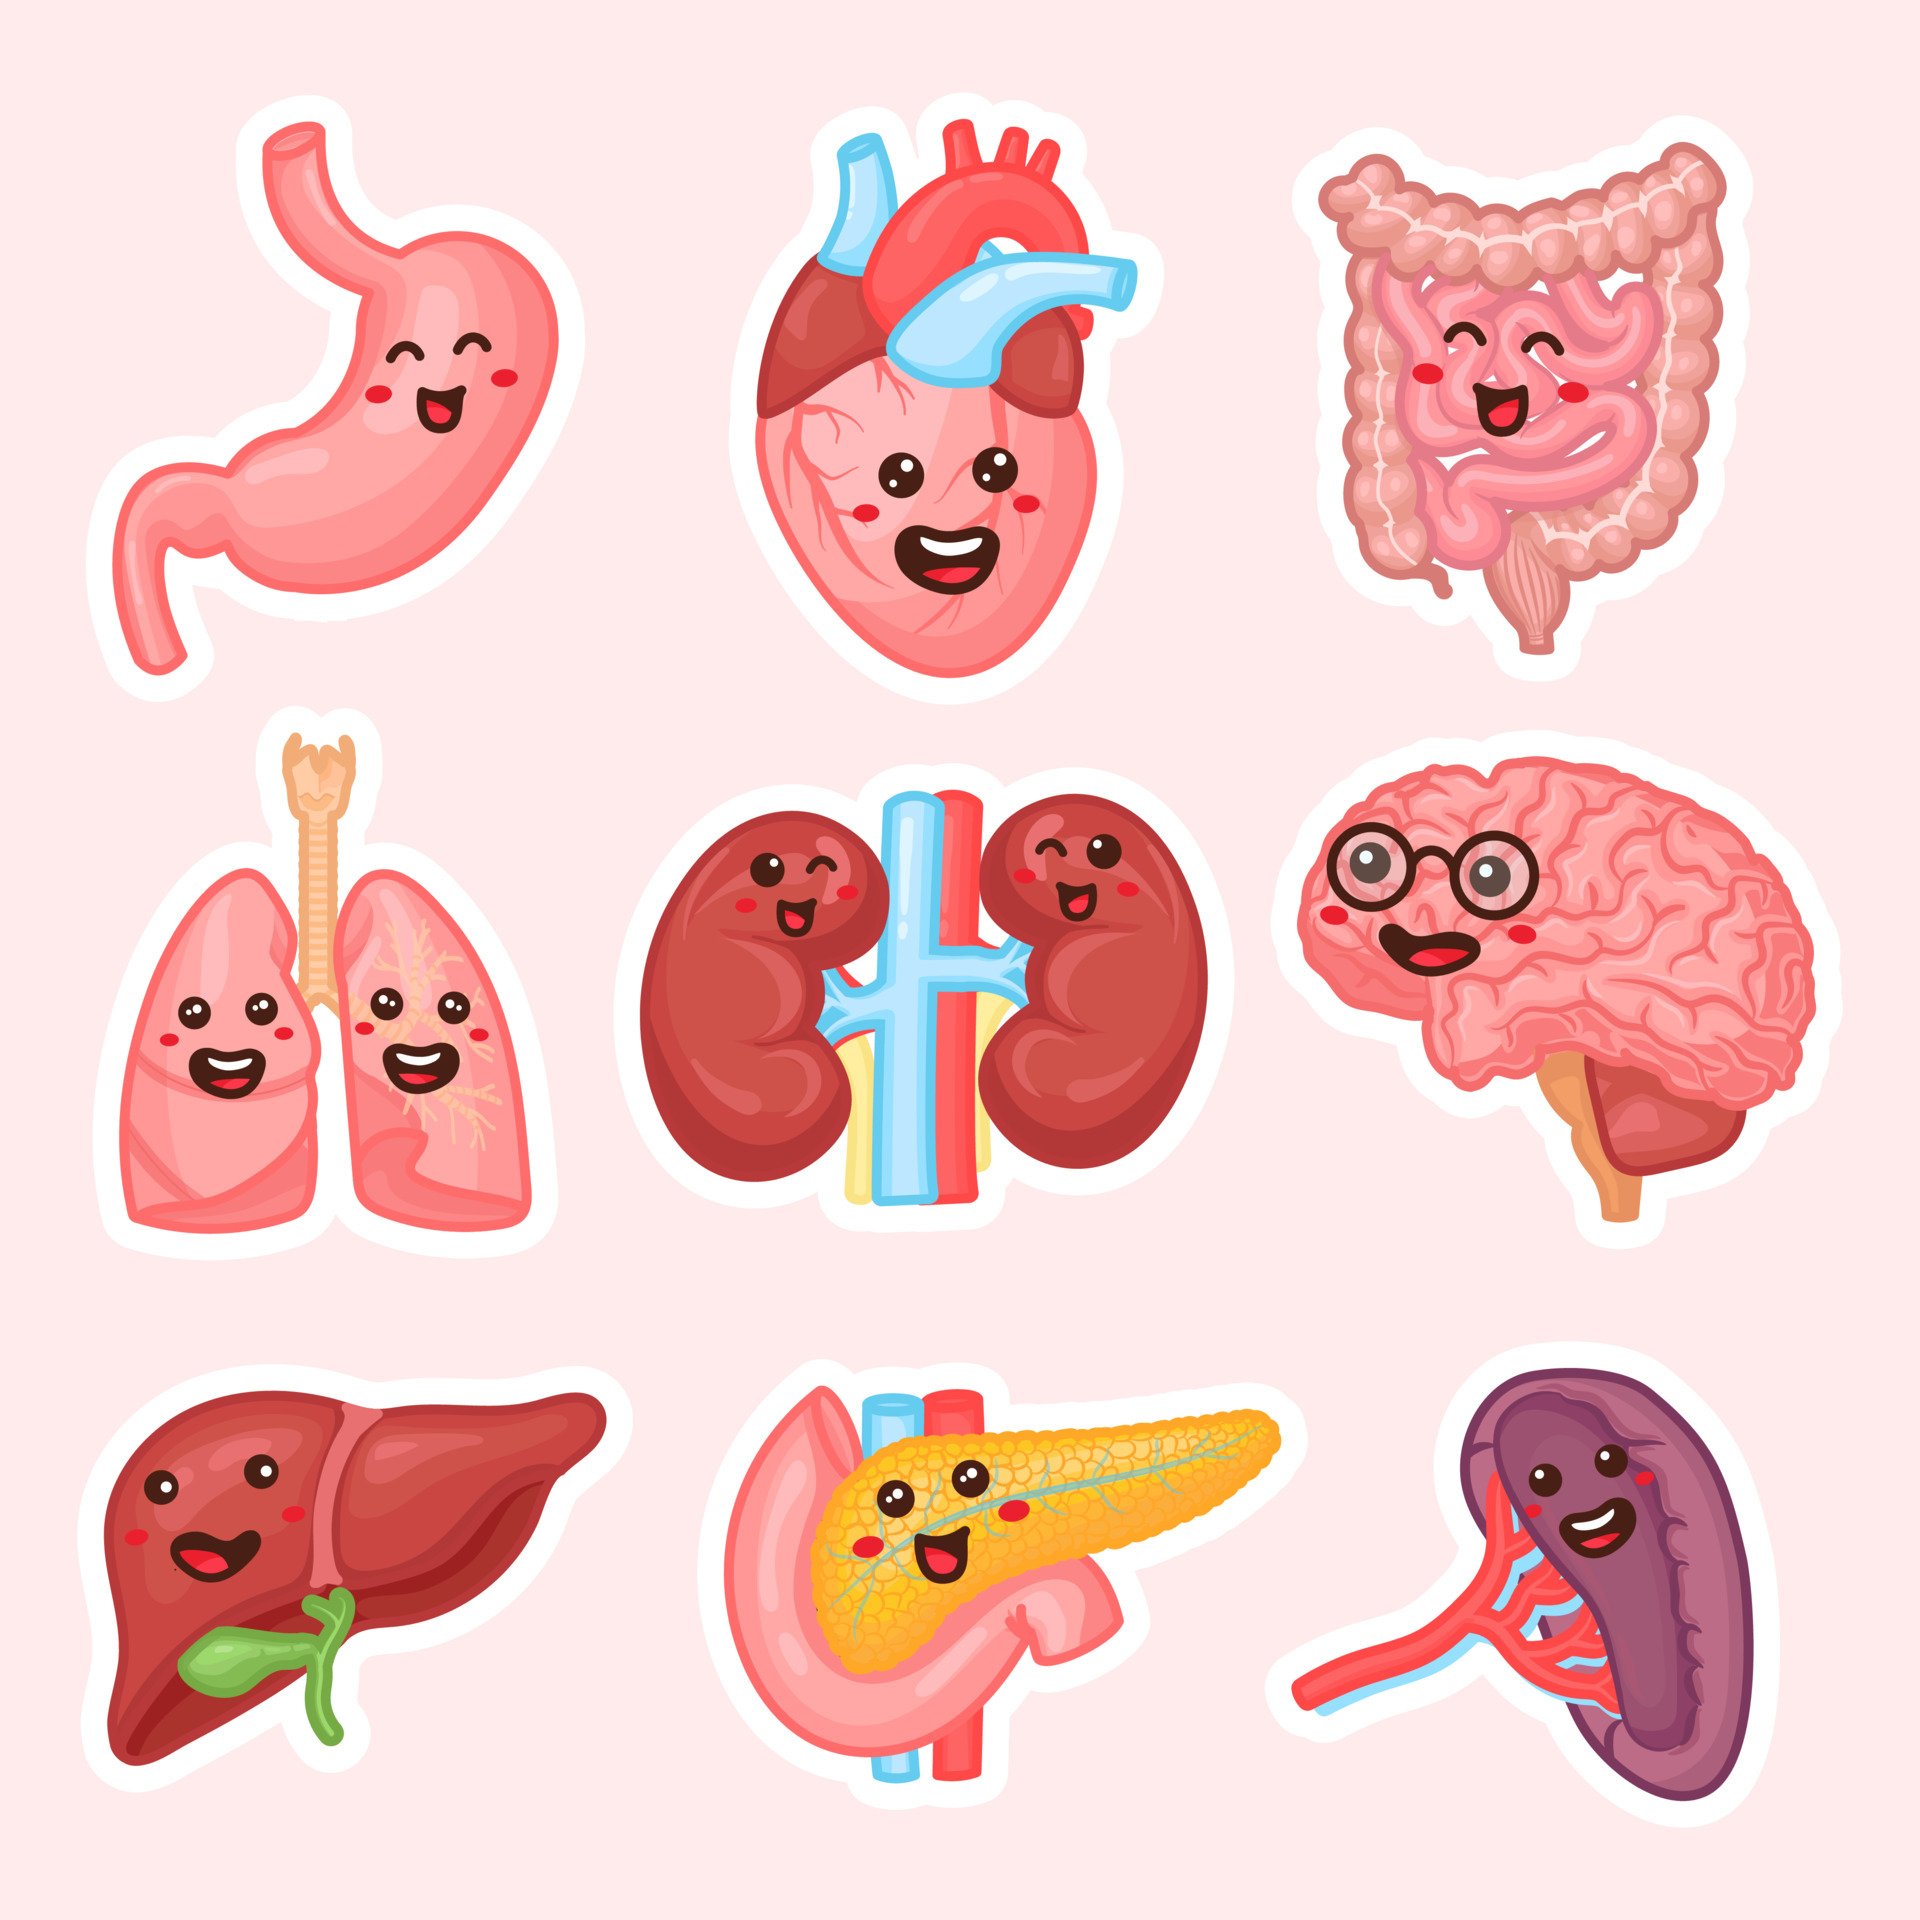 Human internal organs patches design. Funny human body organs stickers ...